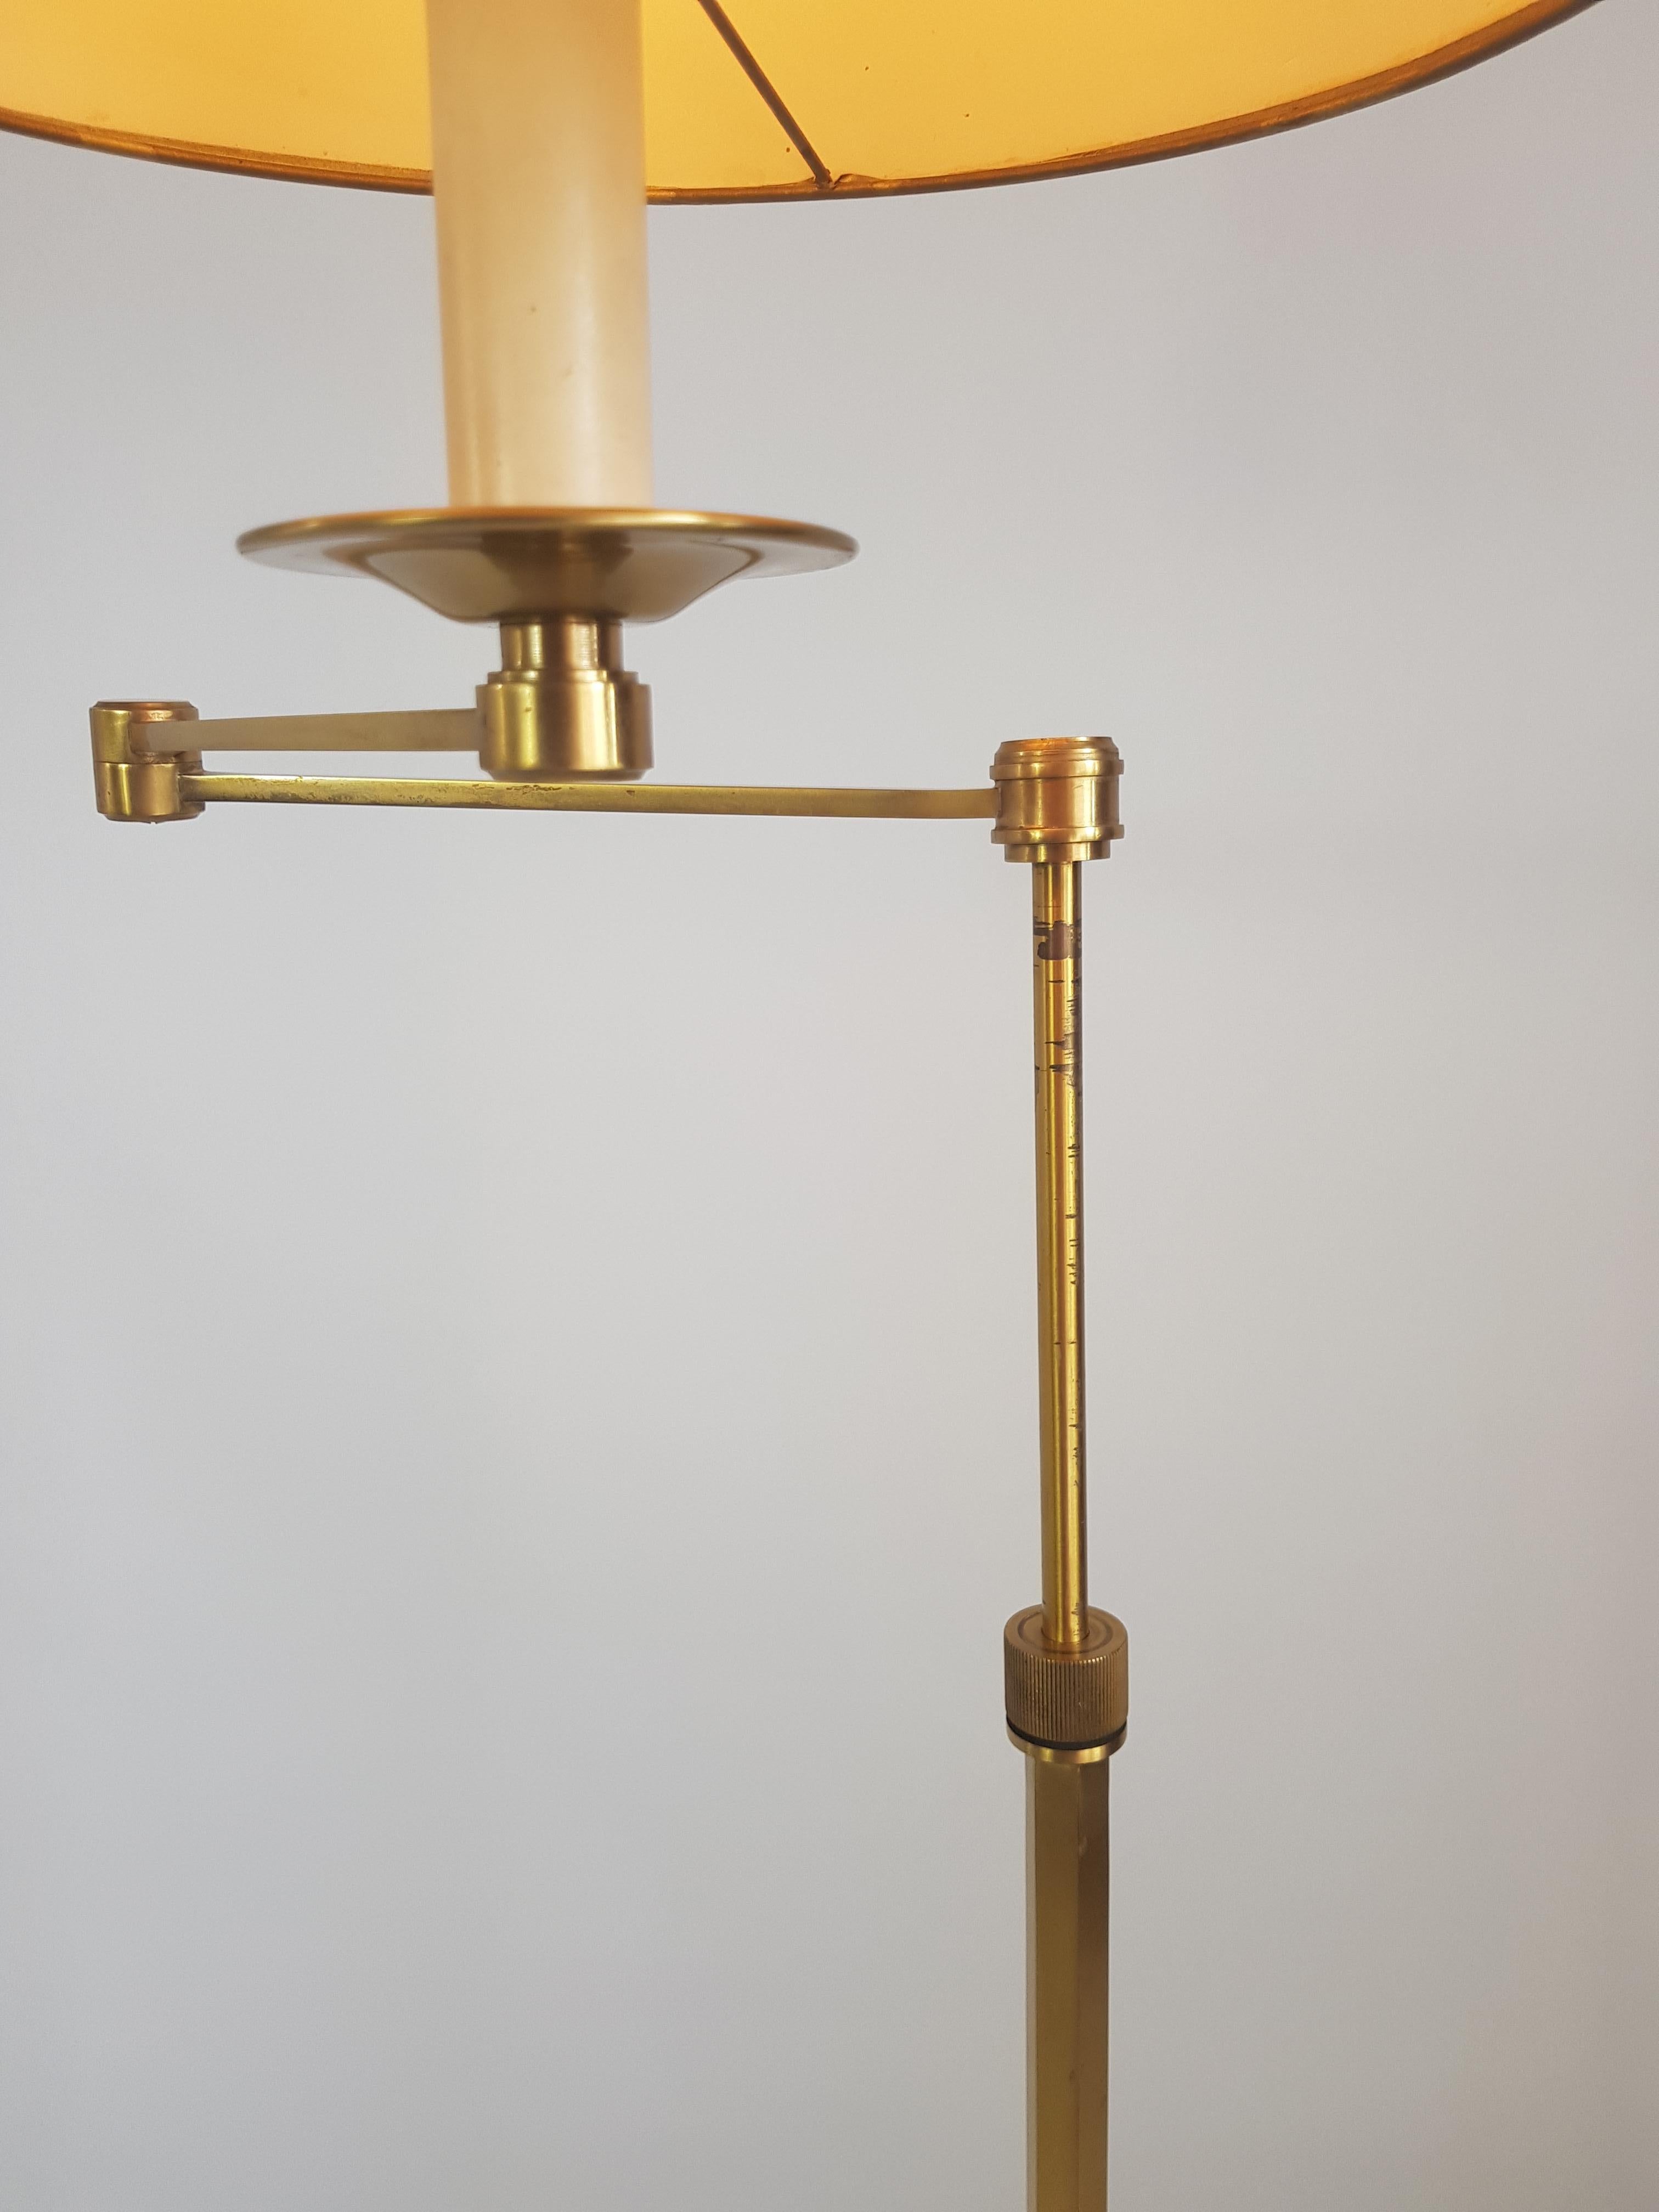 French, Bronze Floor Lamp, Liseuse Maison Bagès, Golden Lampshade, 1970s For Sale 2